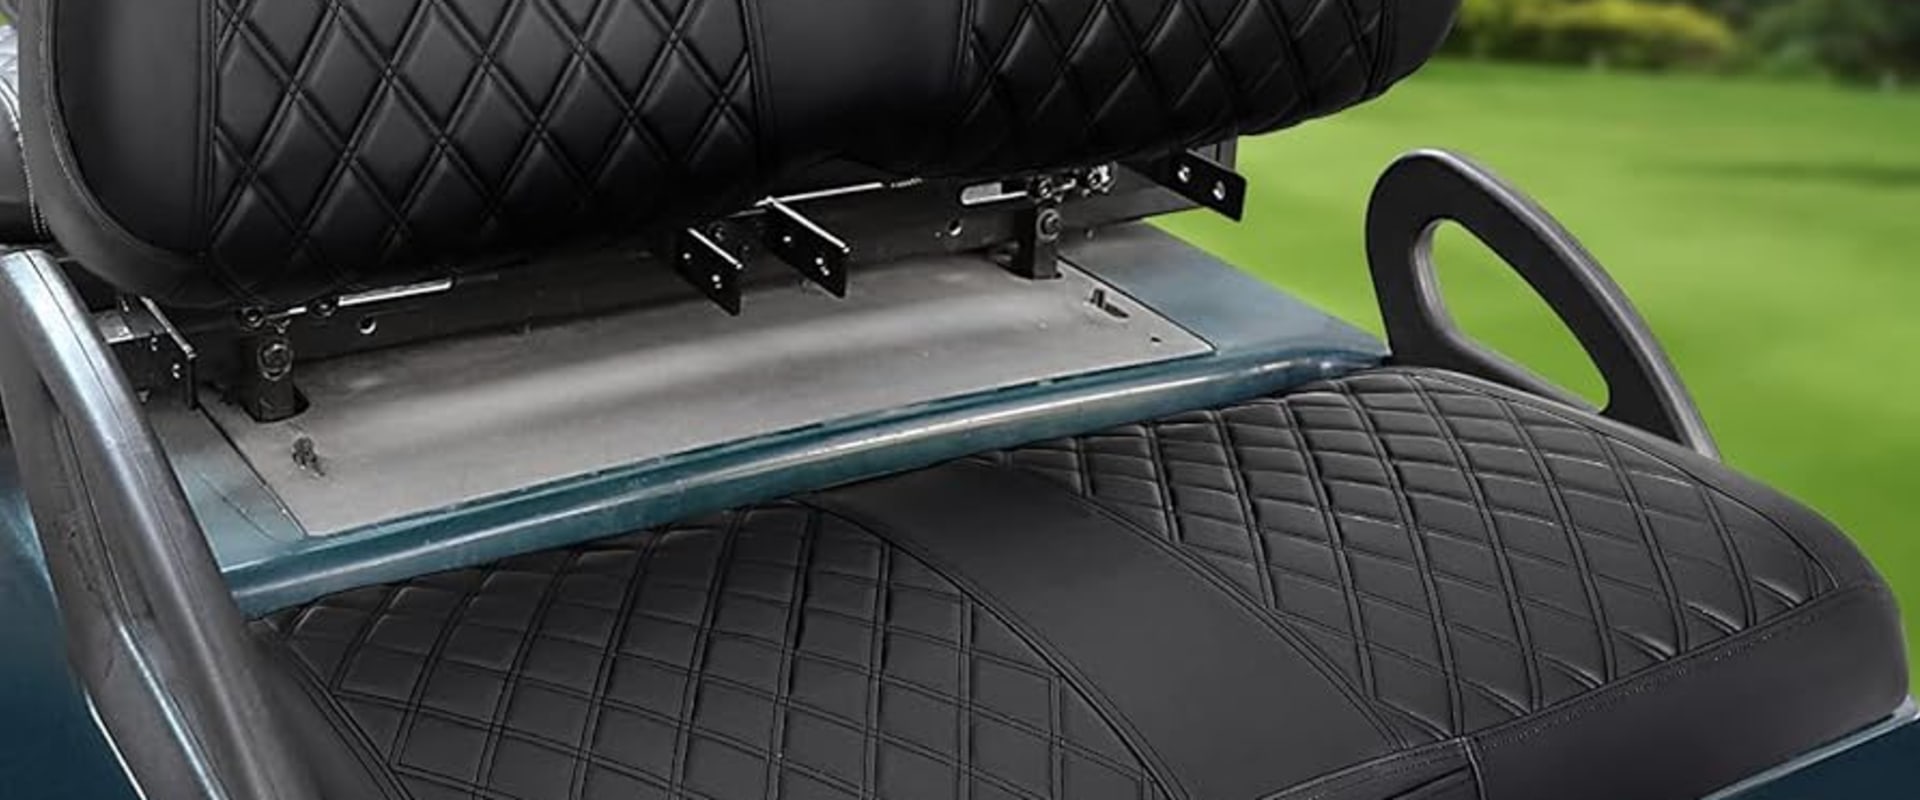 Advantages of Specific Materials for Golf Cart Seat Covers